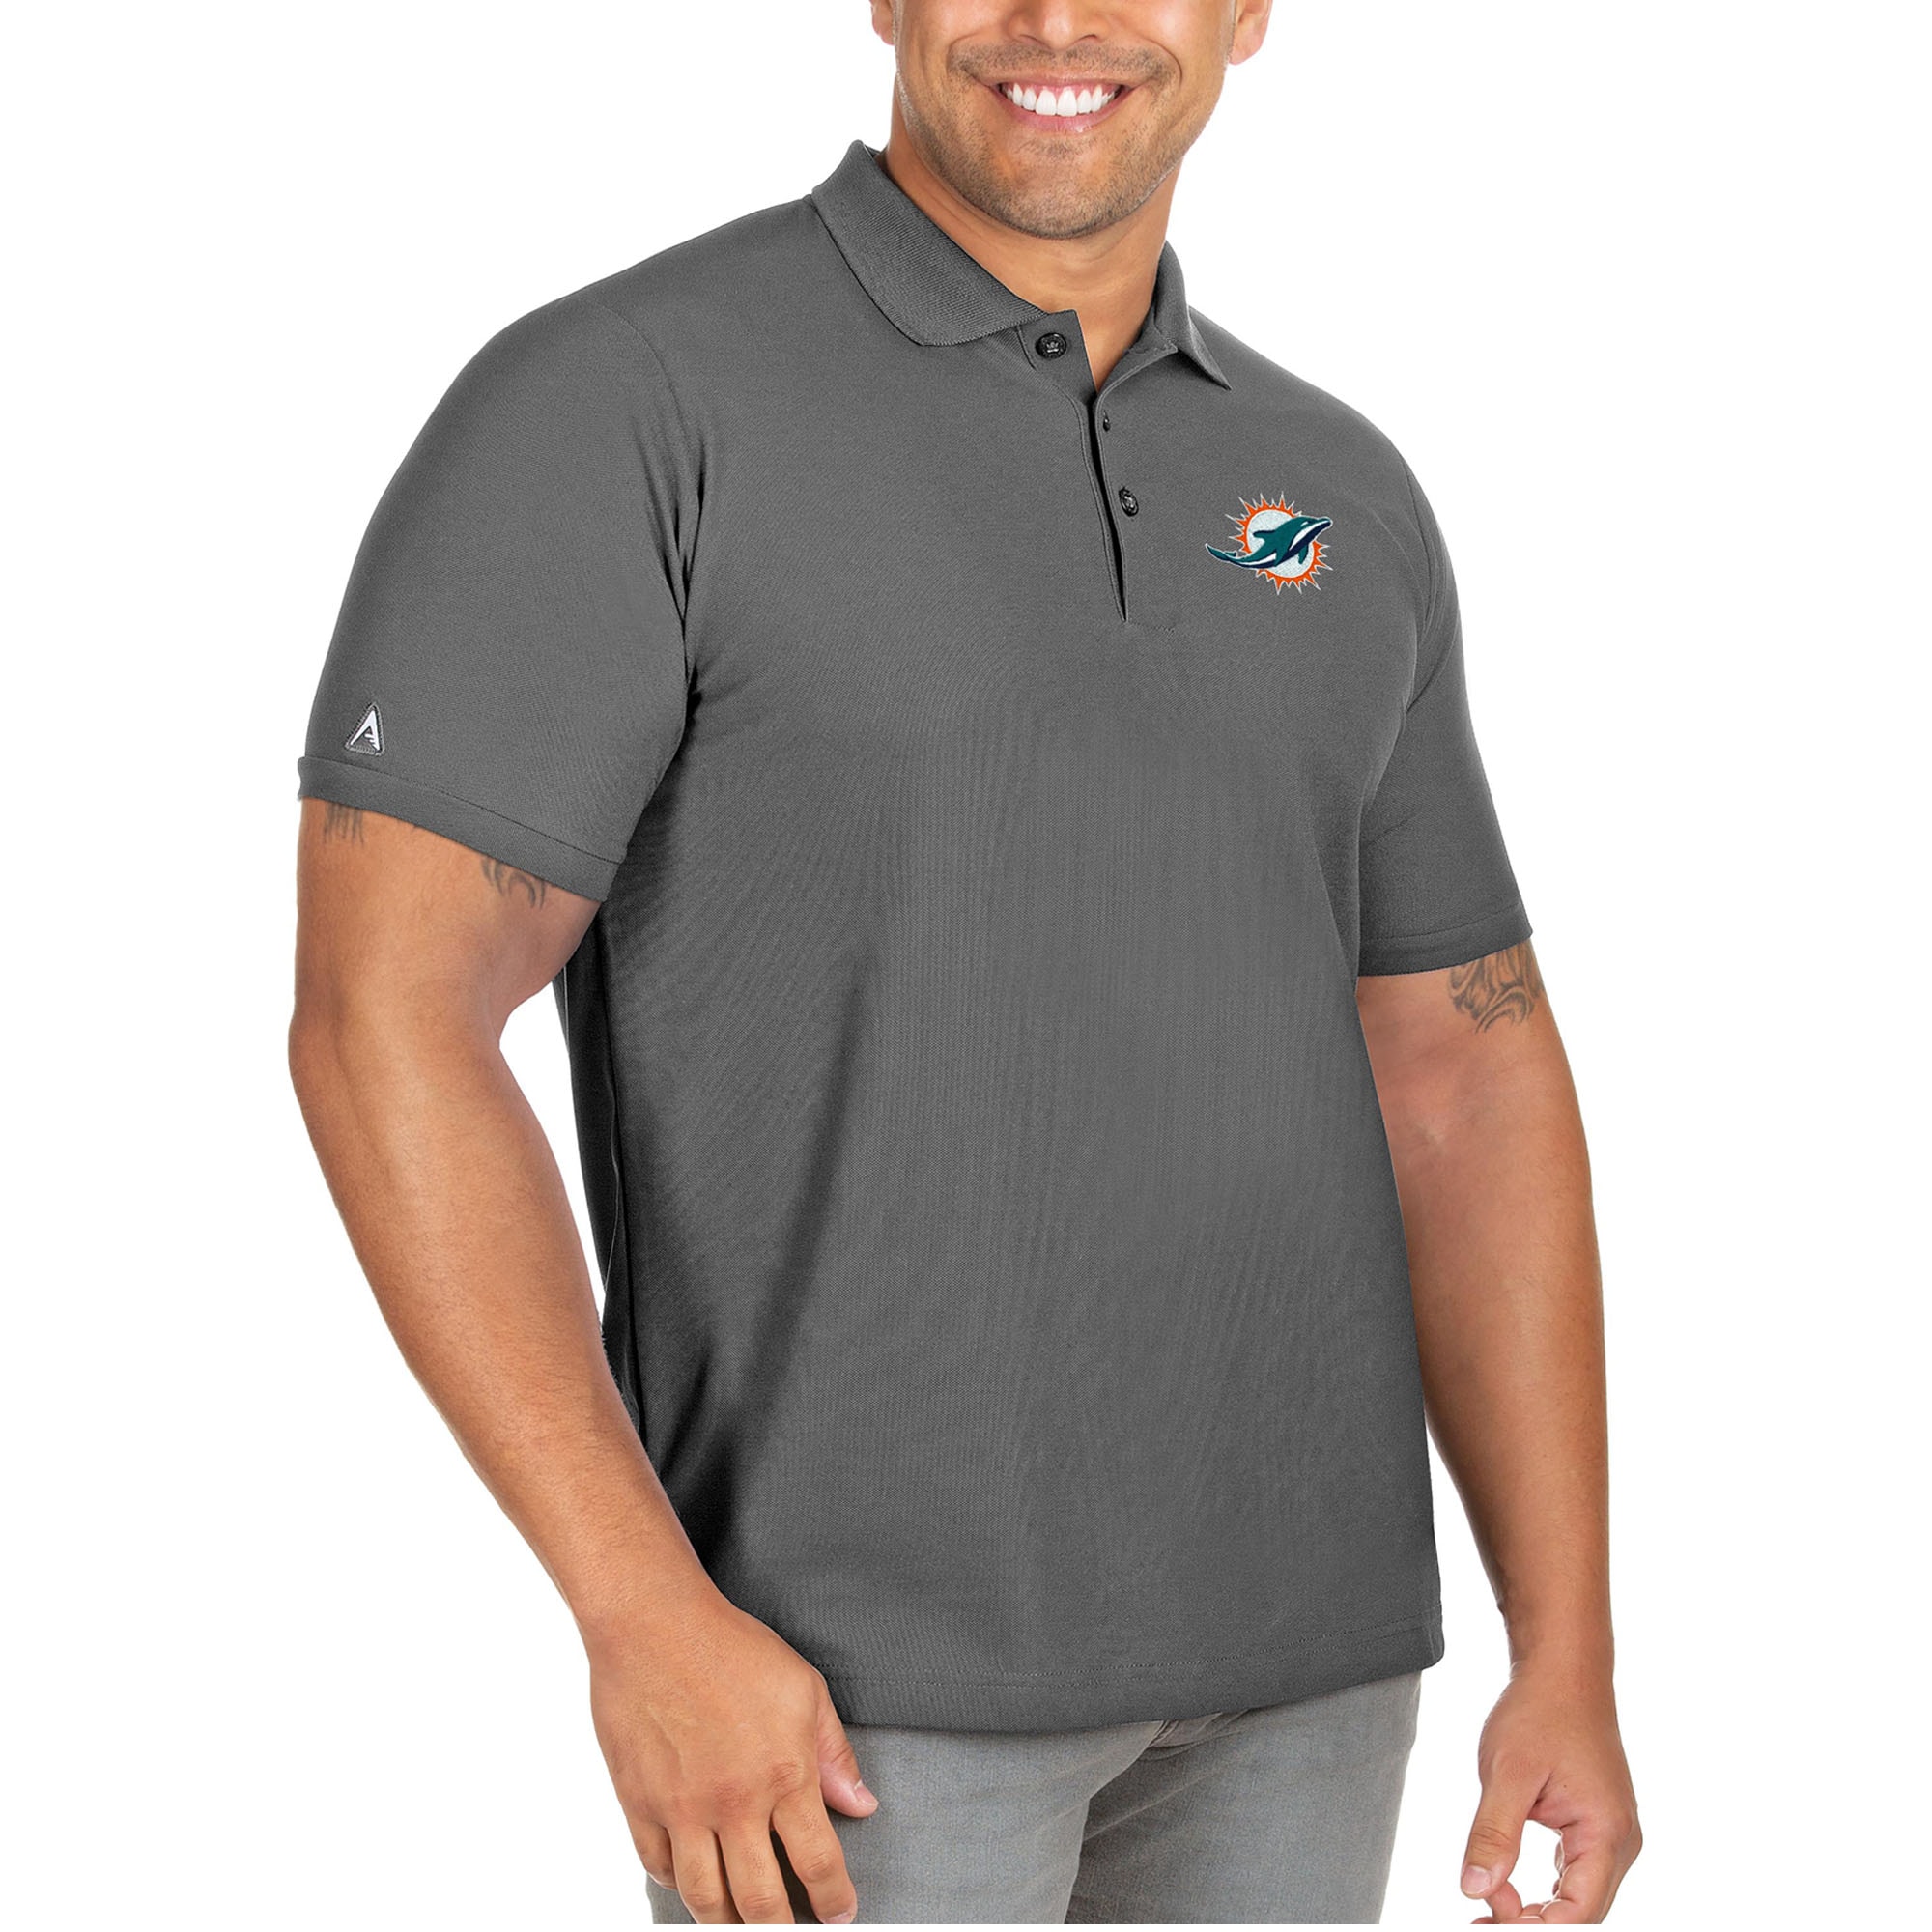 Men's Antigua Charcoal Miami Dolphins Big & Tall Legacy Pique Polo - image 1 of 1